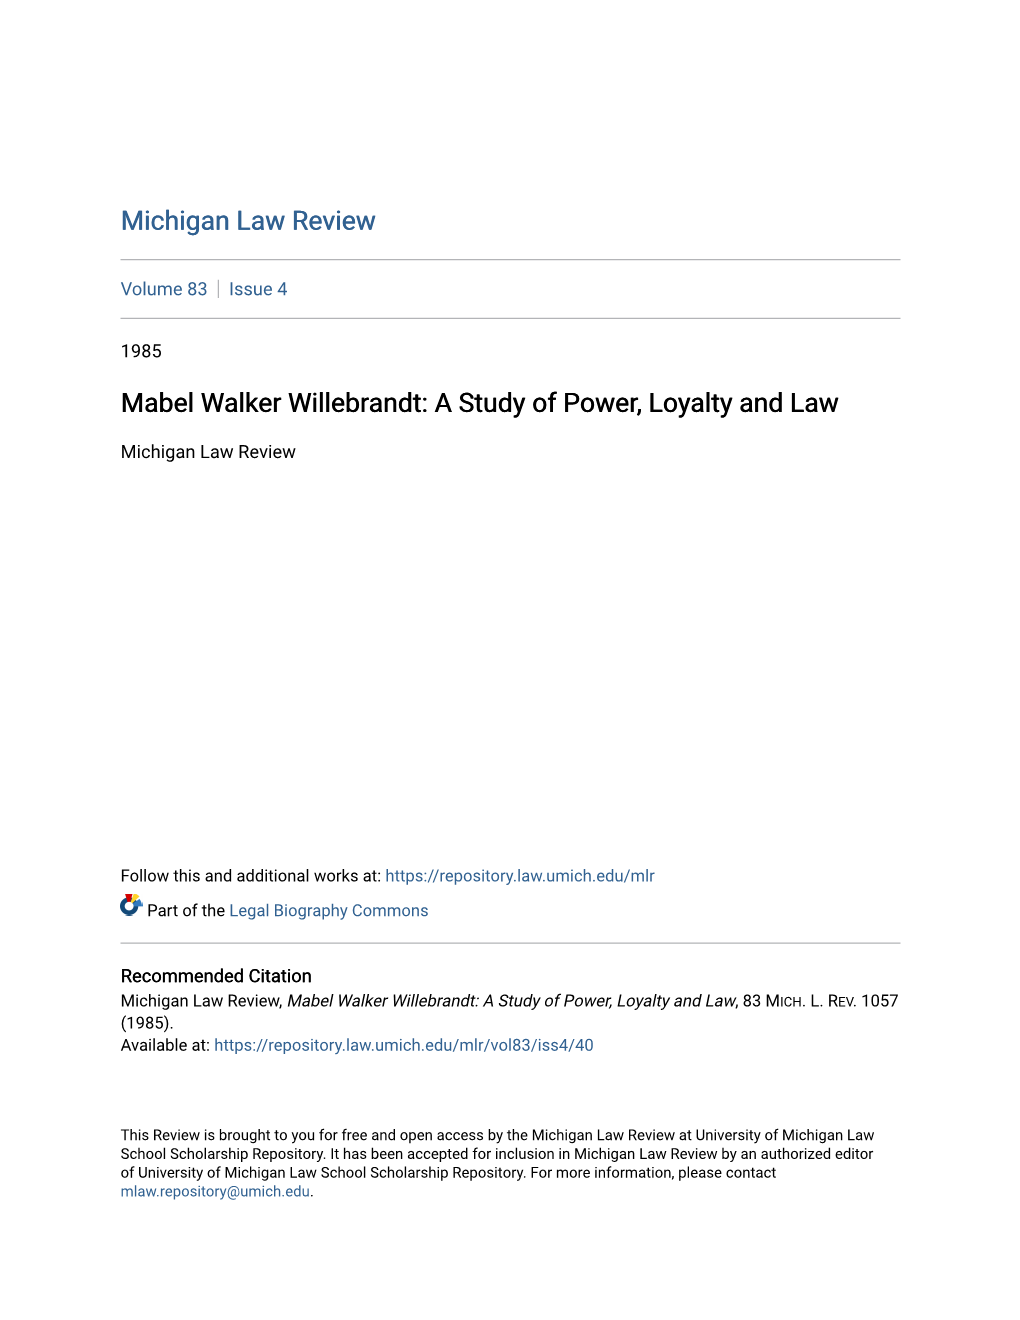 Mabel Walker Willebrandt: a Study of Power, Loyalty and Law